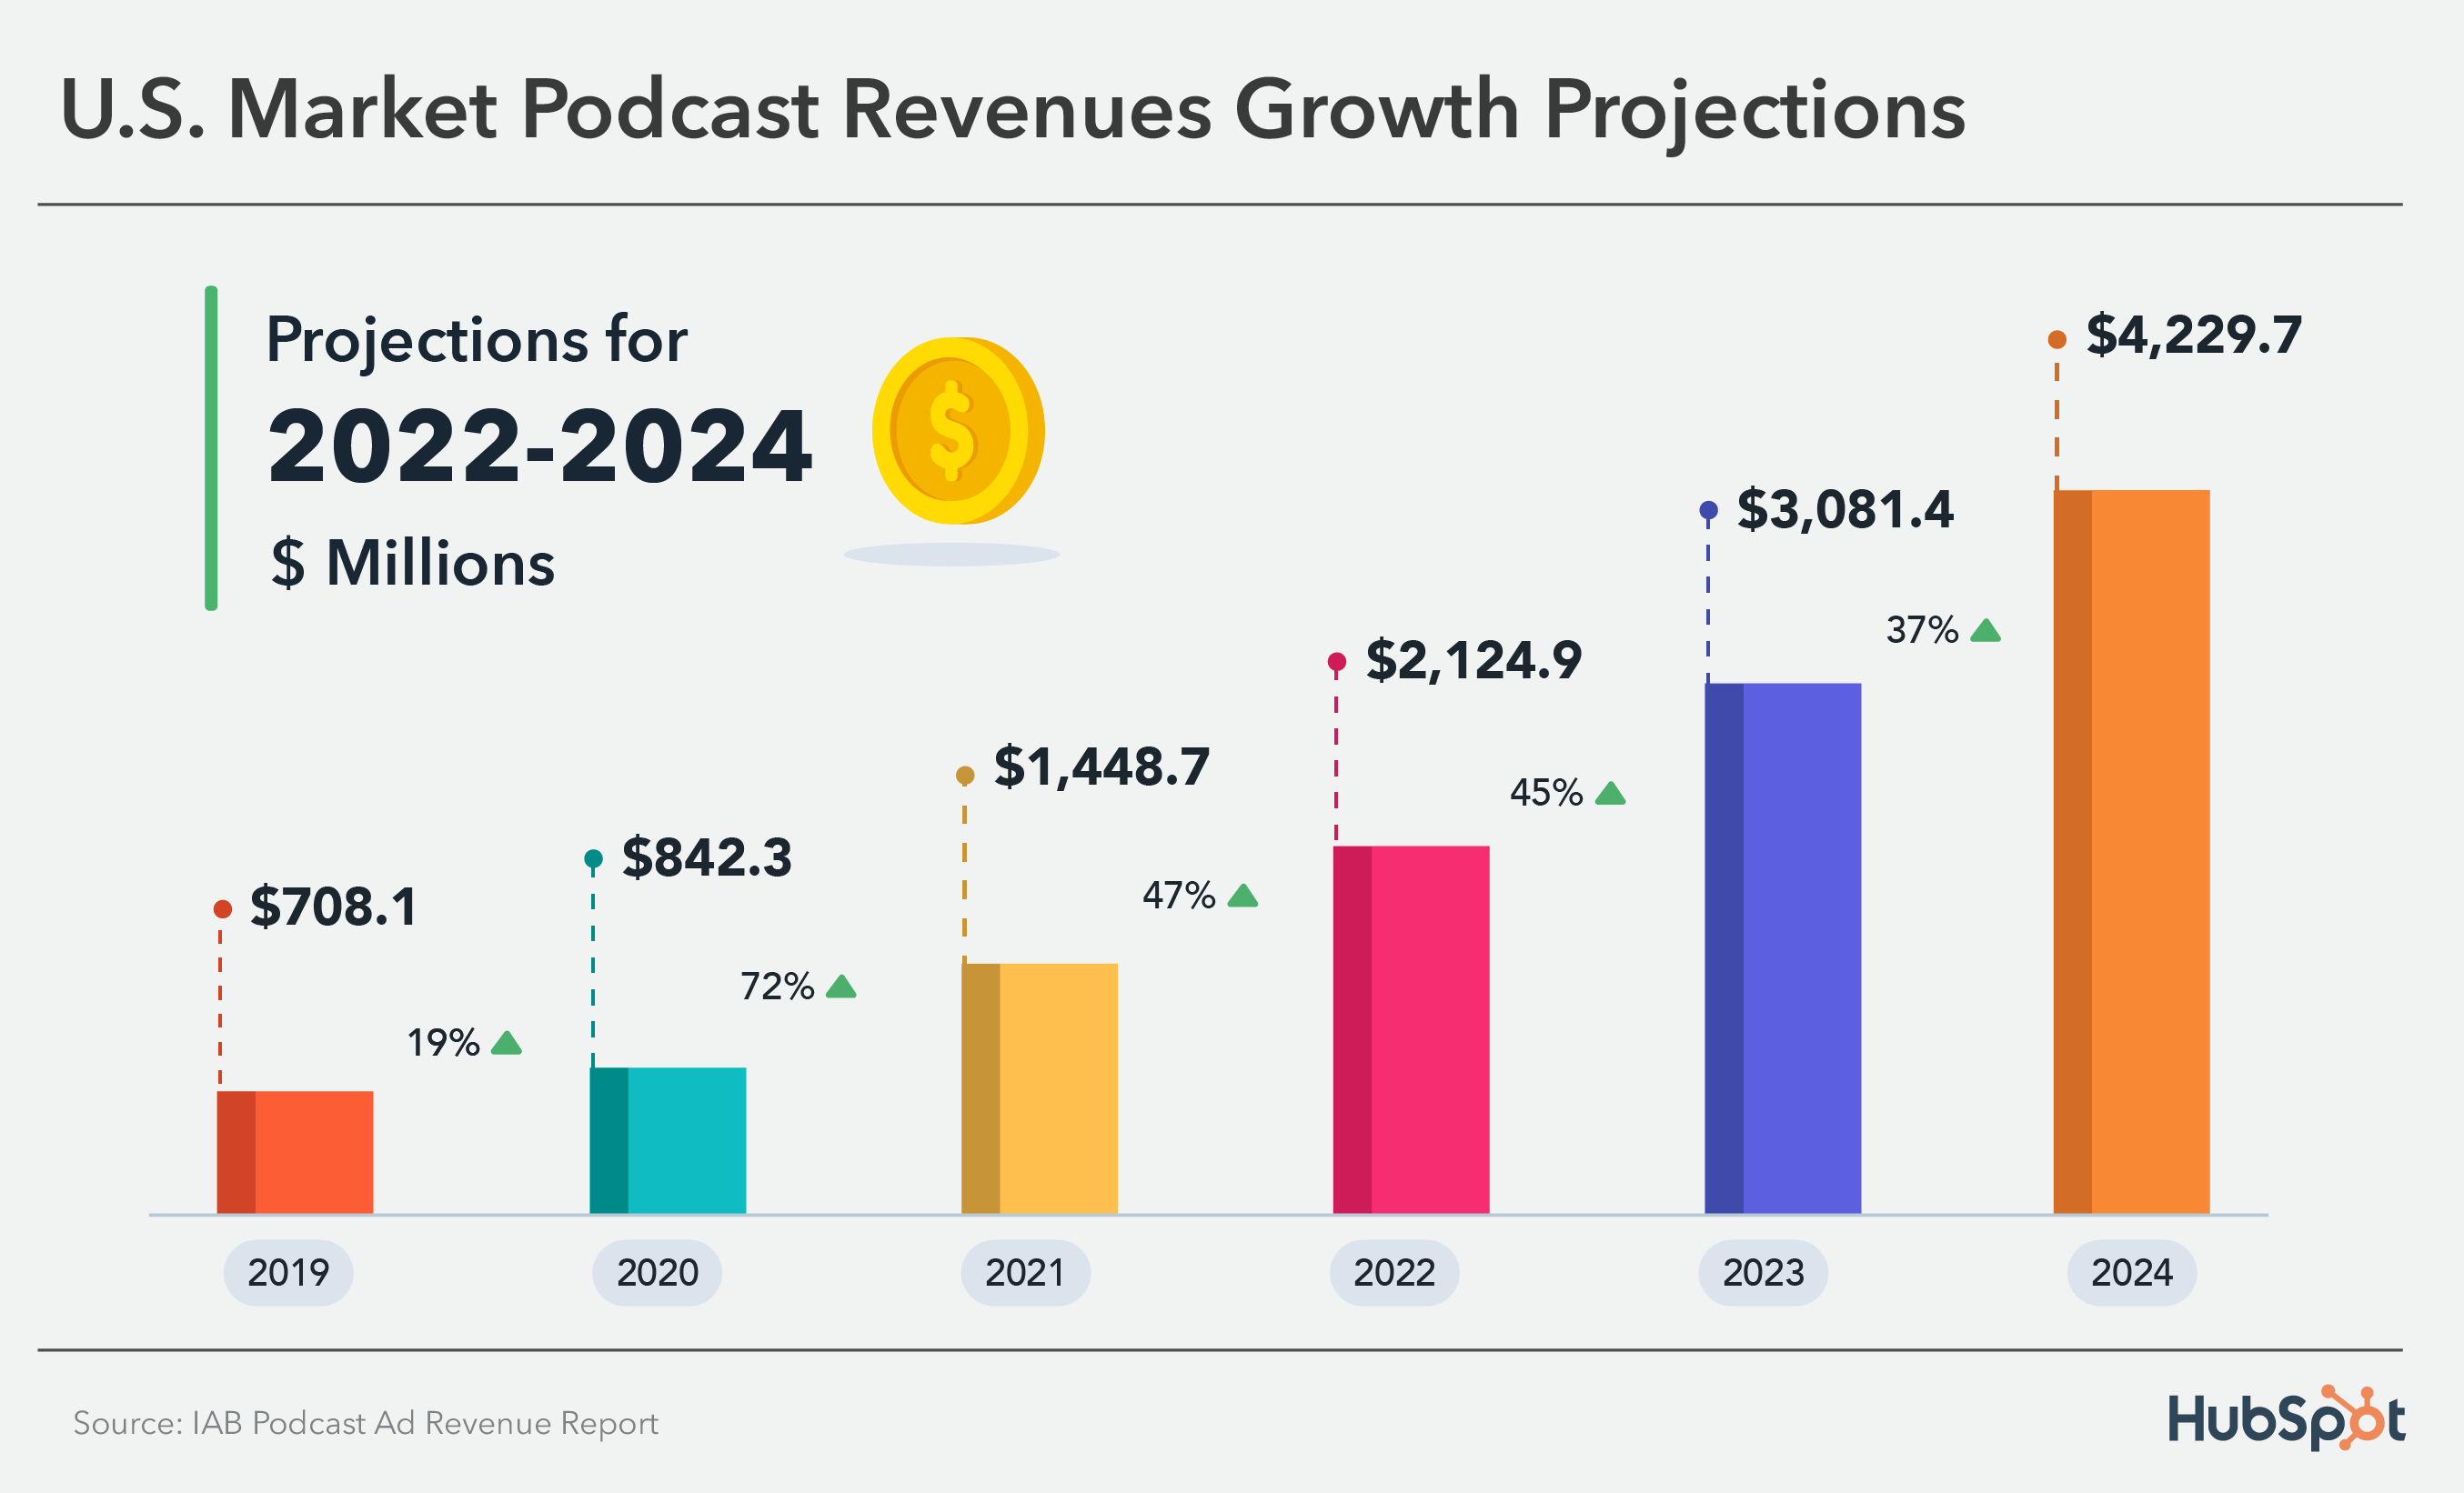  podcast revenue growth